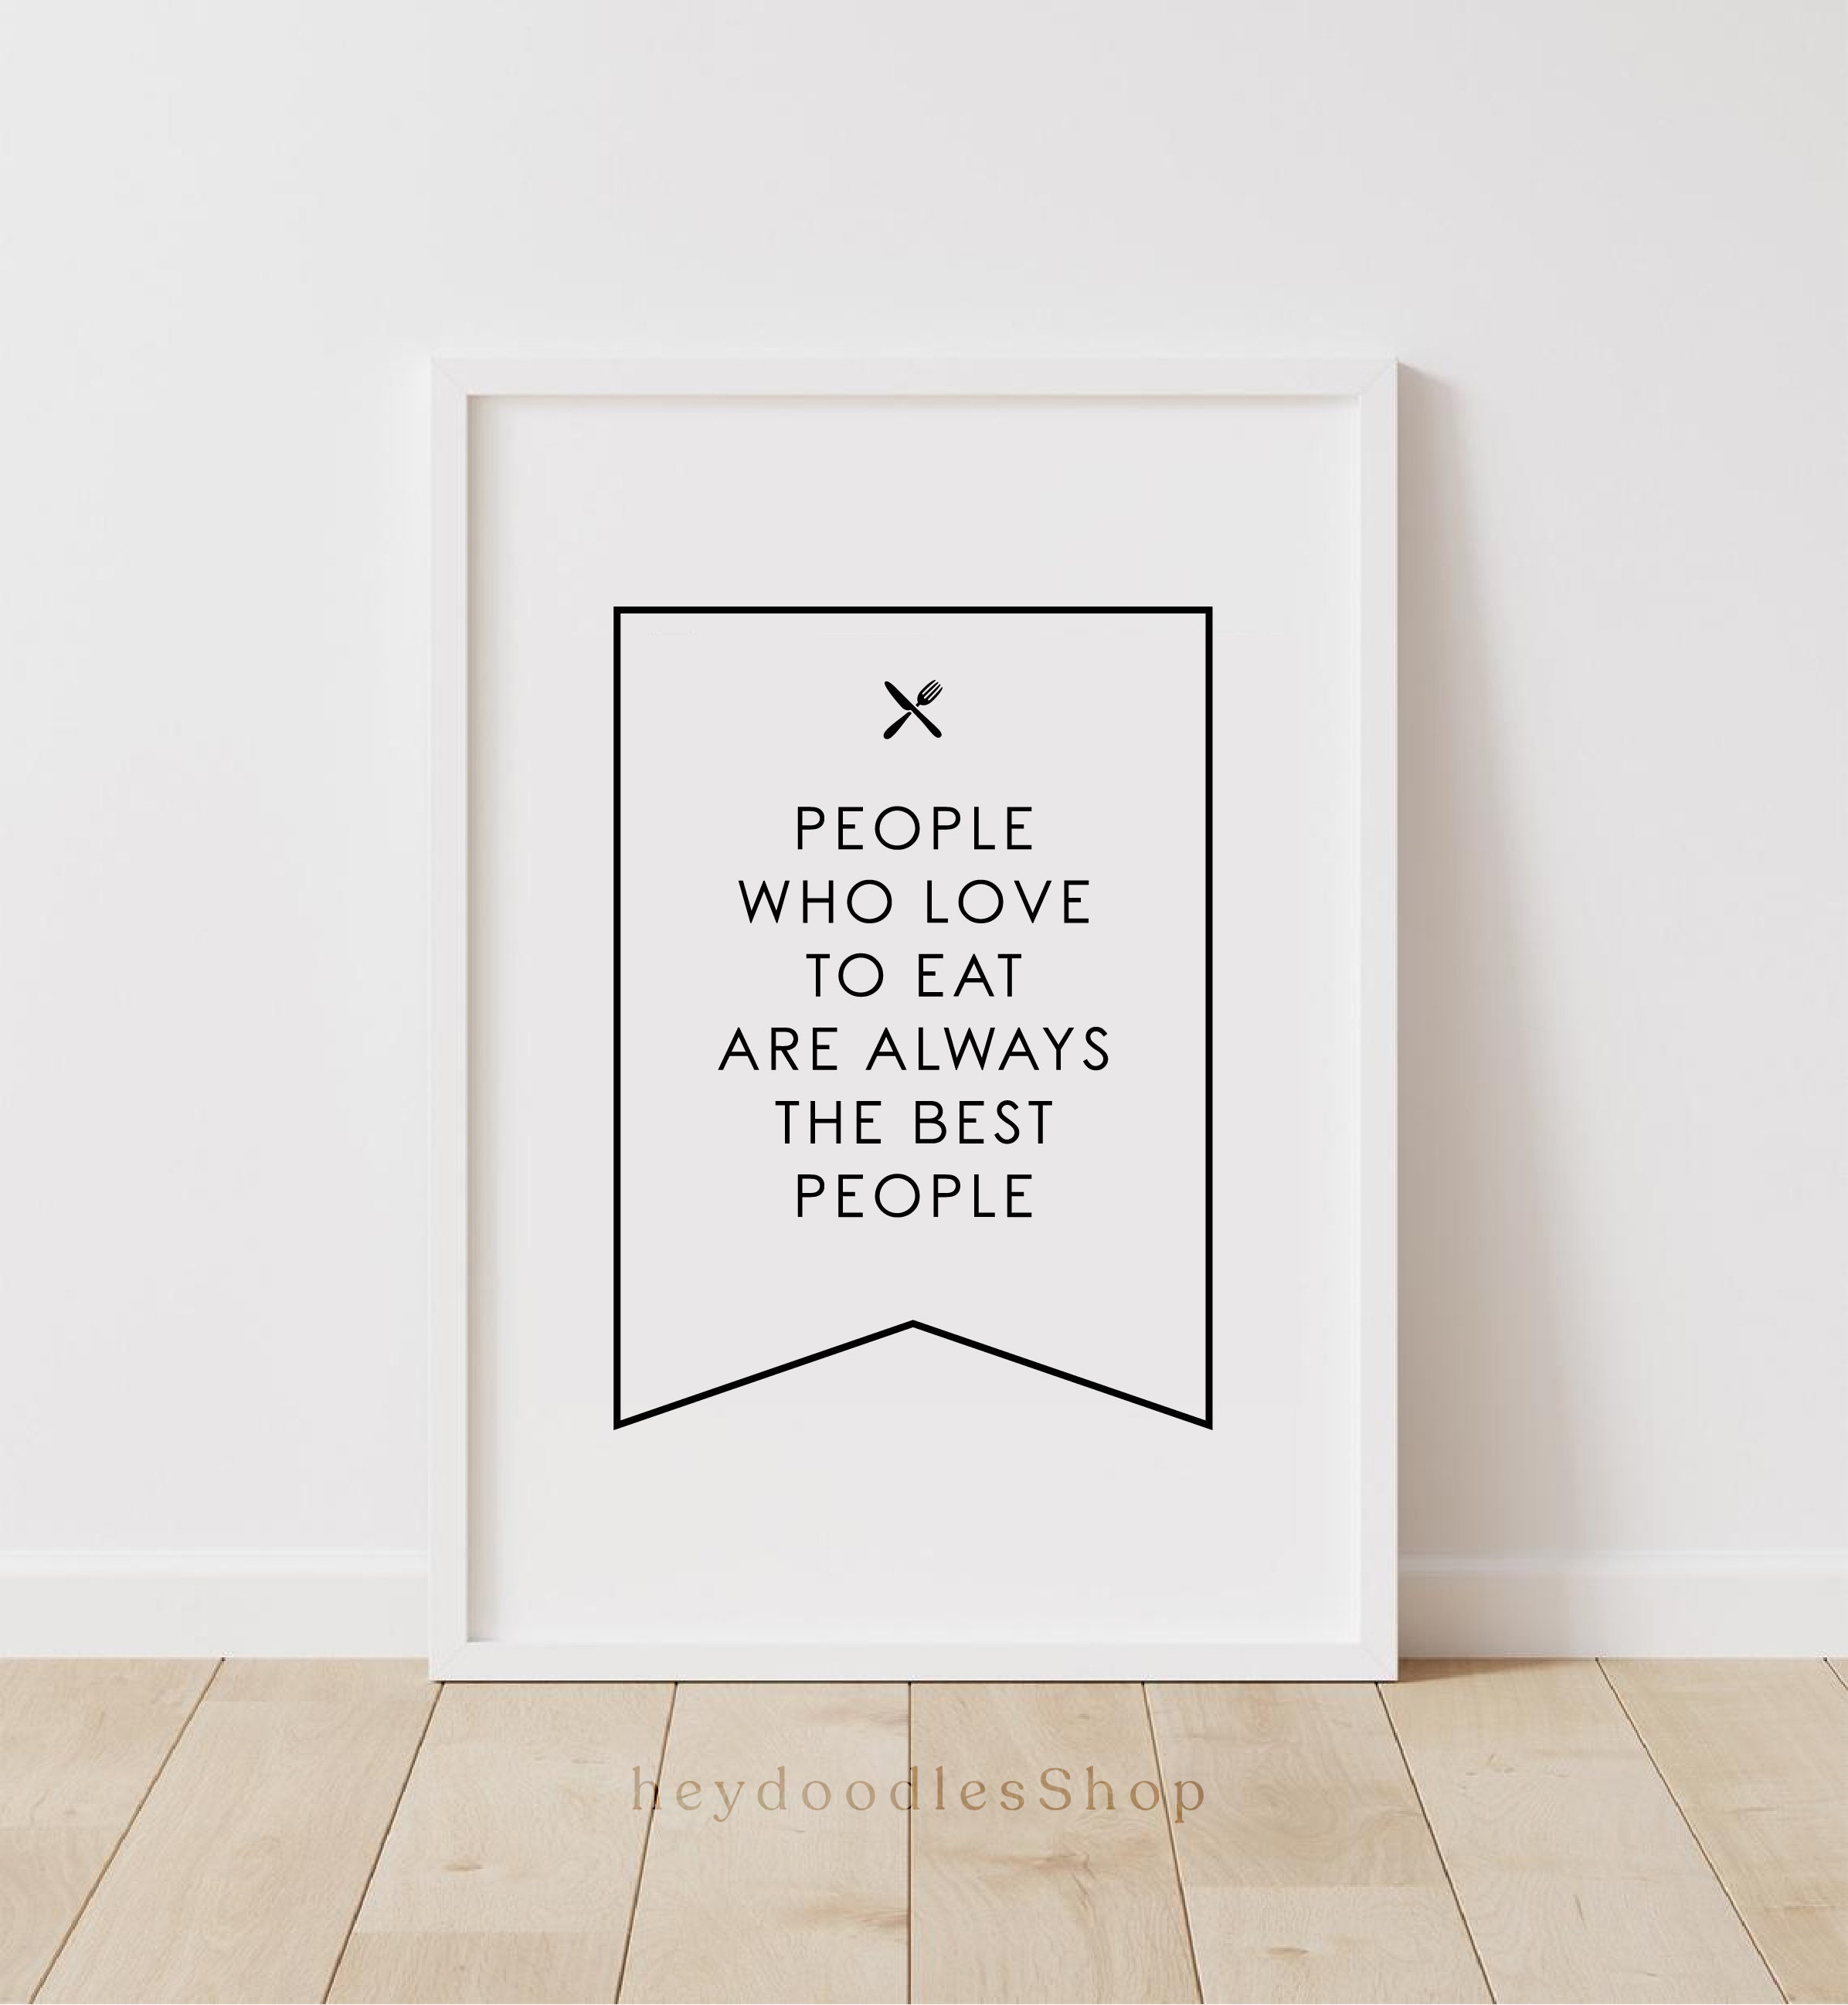 People Who Love to Eat Are - Sign Etsy Always People the Best